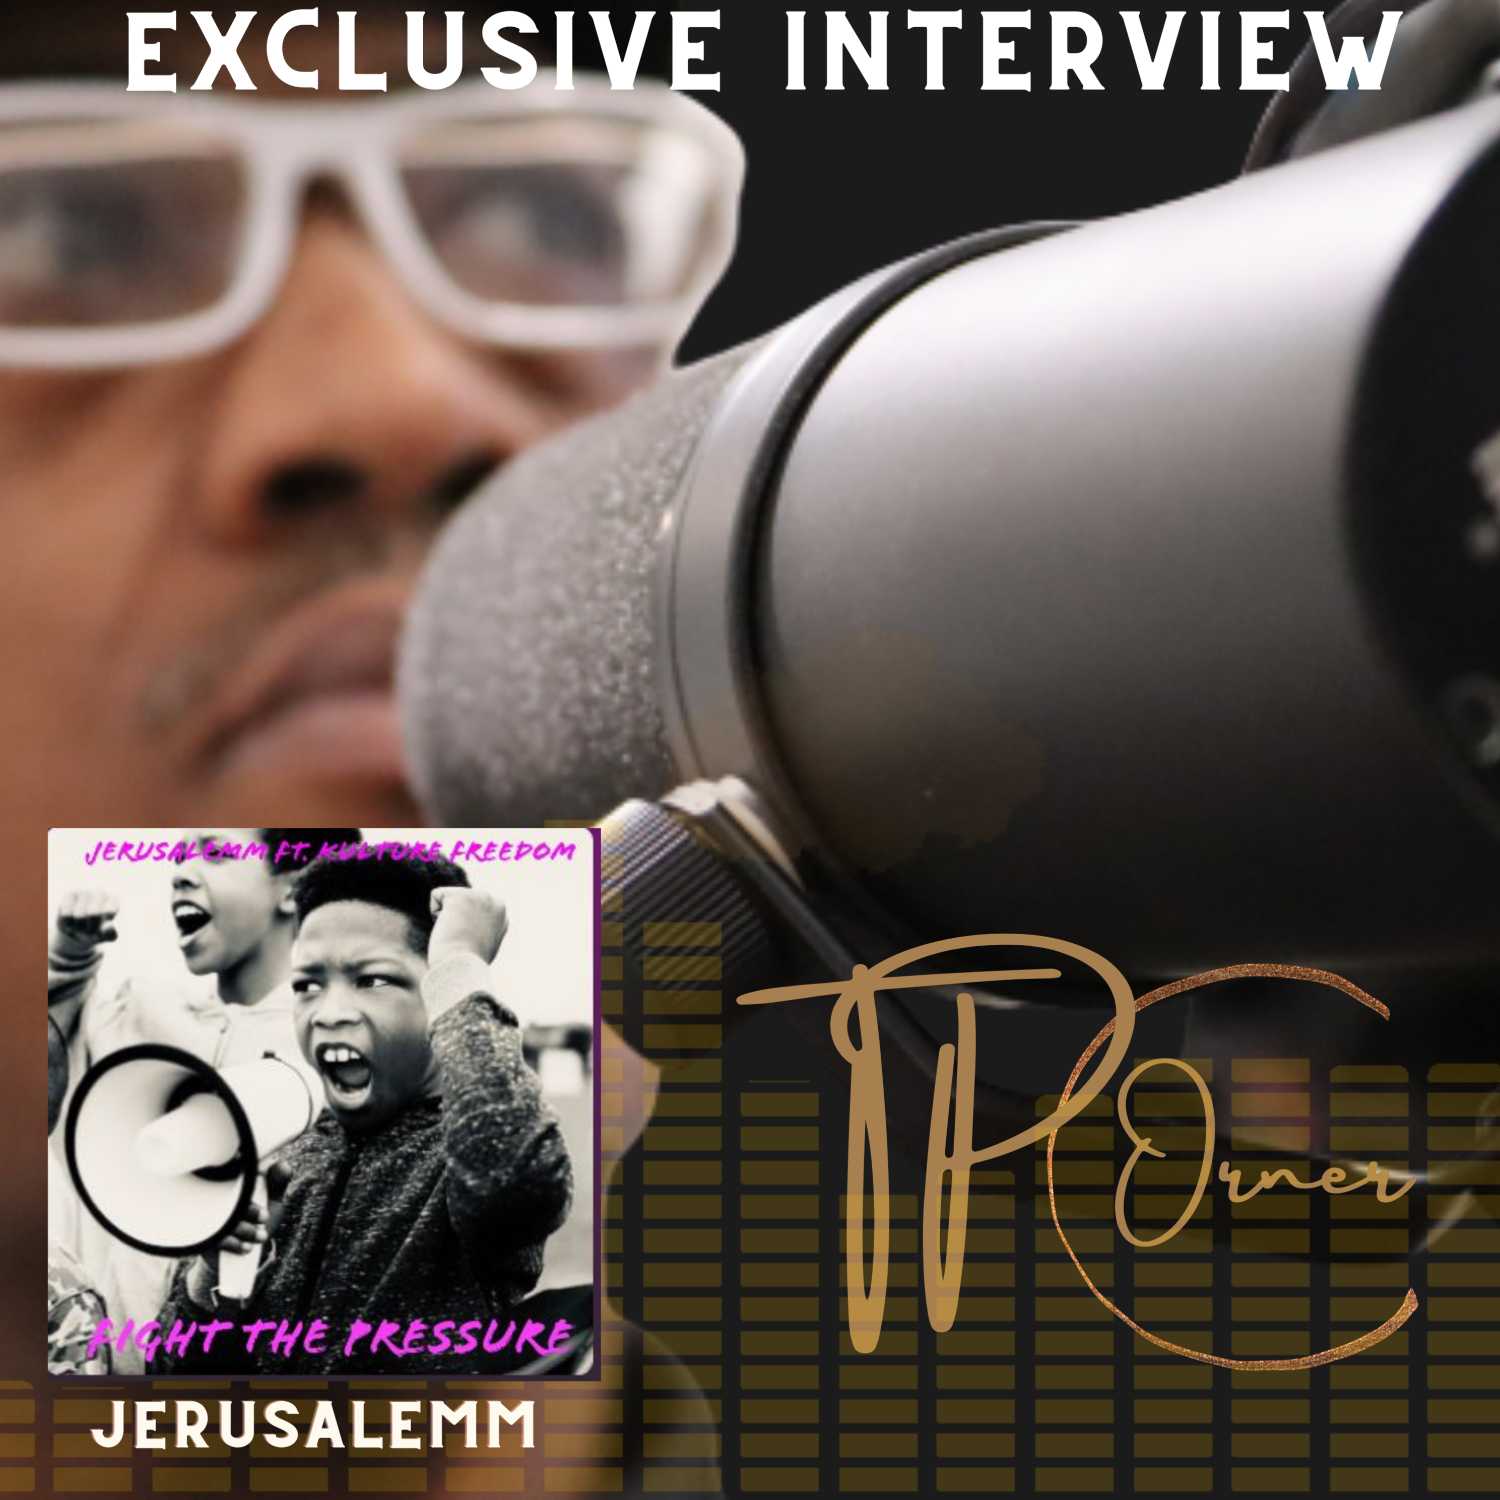 TPC EXCLUSIVE INTERVIEW WITH FREEDOM FIGHTER JERUSALEMM